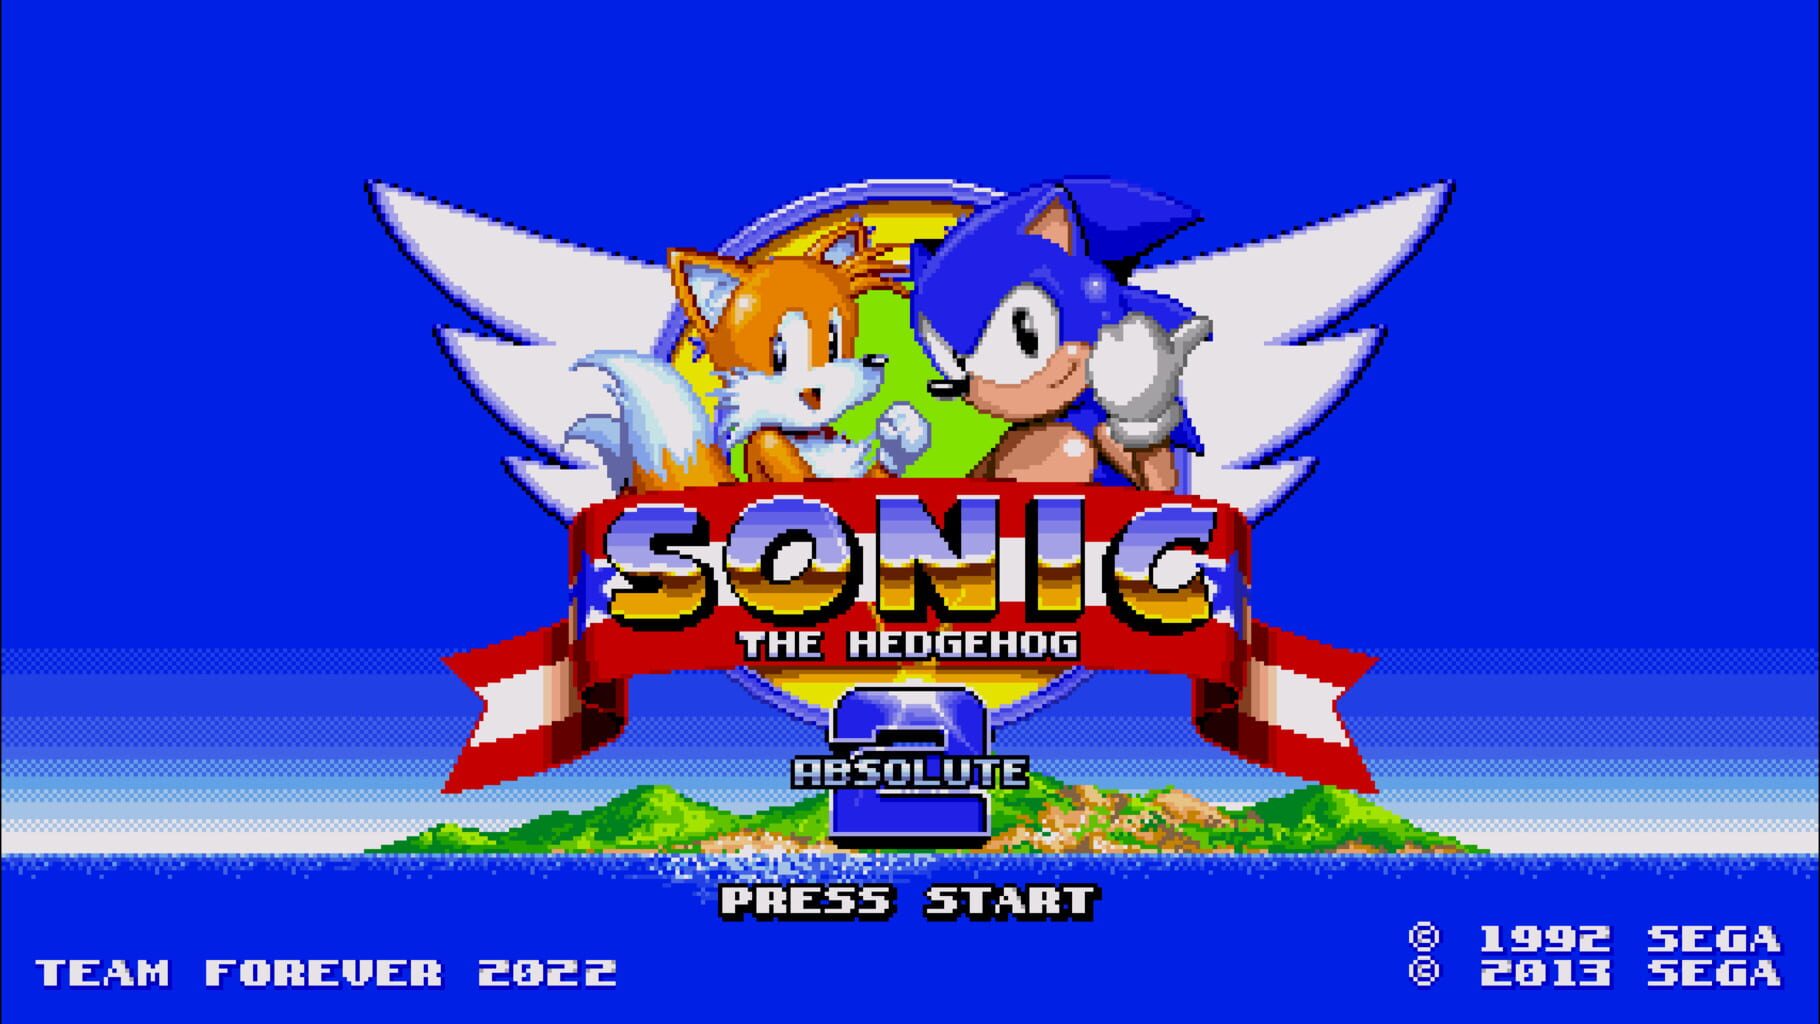 Sonic the Hedgehog 2: Absolute